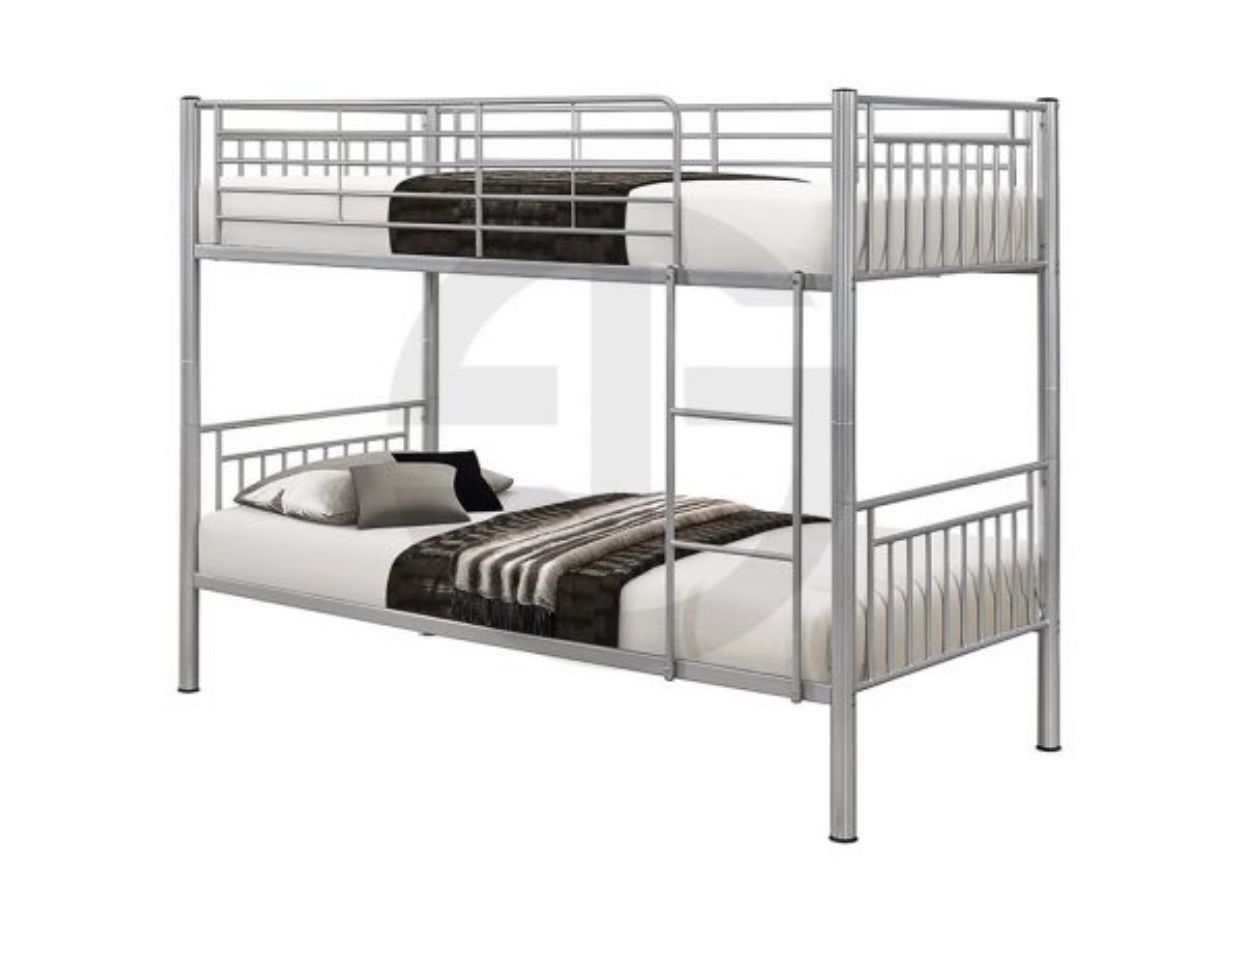 IKEA Bunk Beds with matching Pull Out Bed